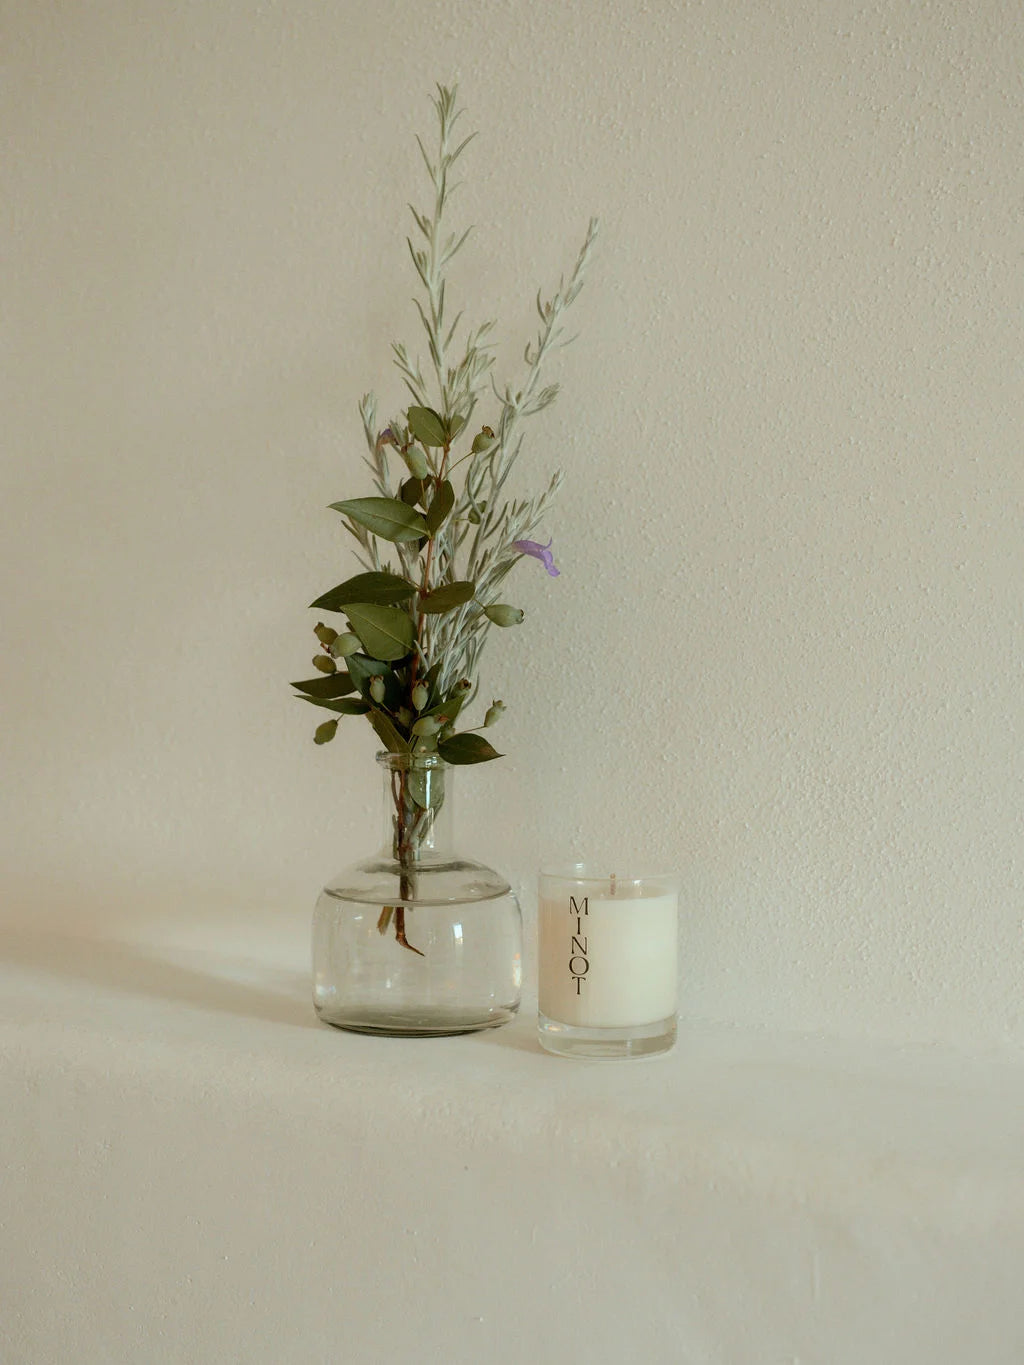 The minimalist Summit Mini candle sits next to a small bouquet of soft greenery and purple flowers